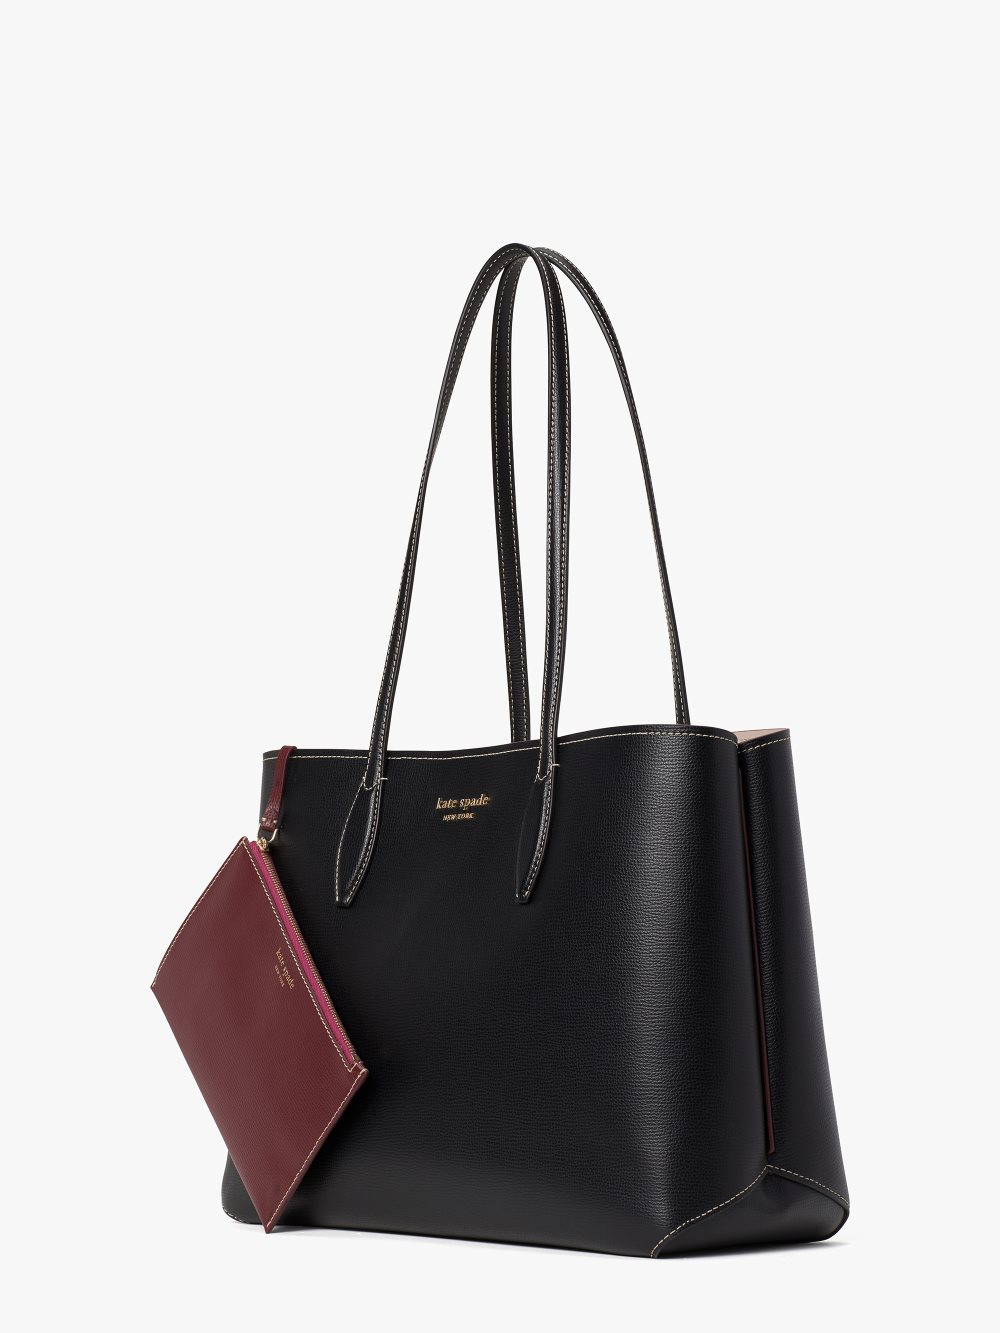 Women's black all day large tote | Kate Spade